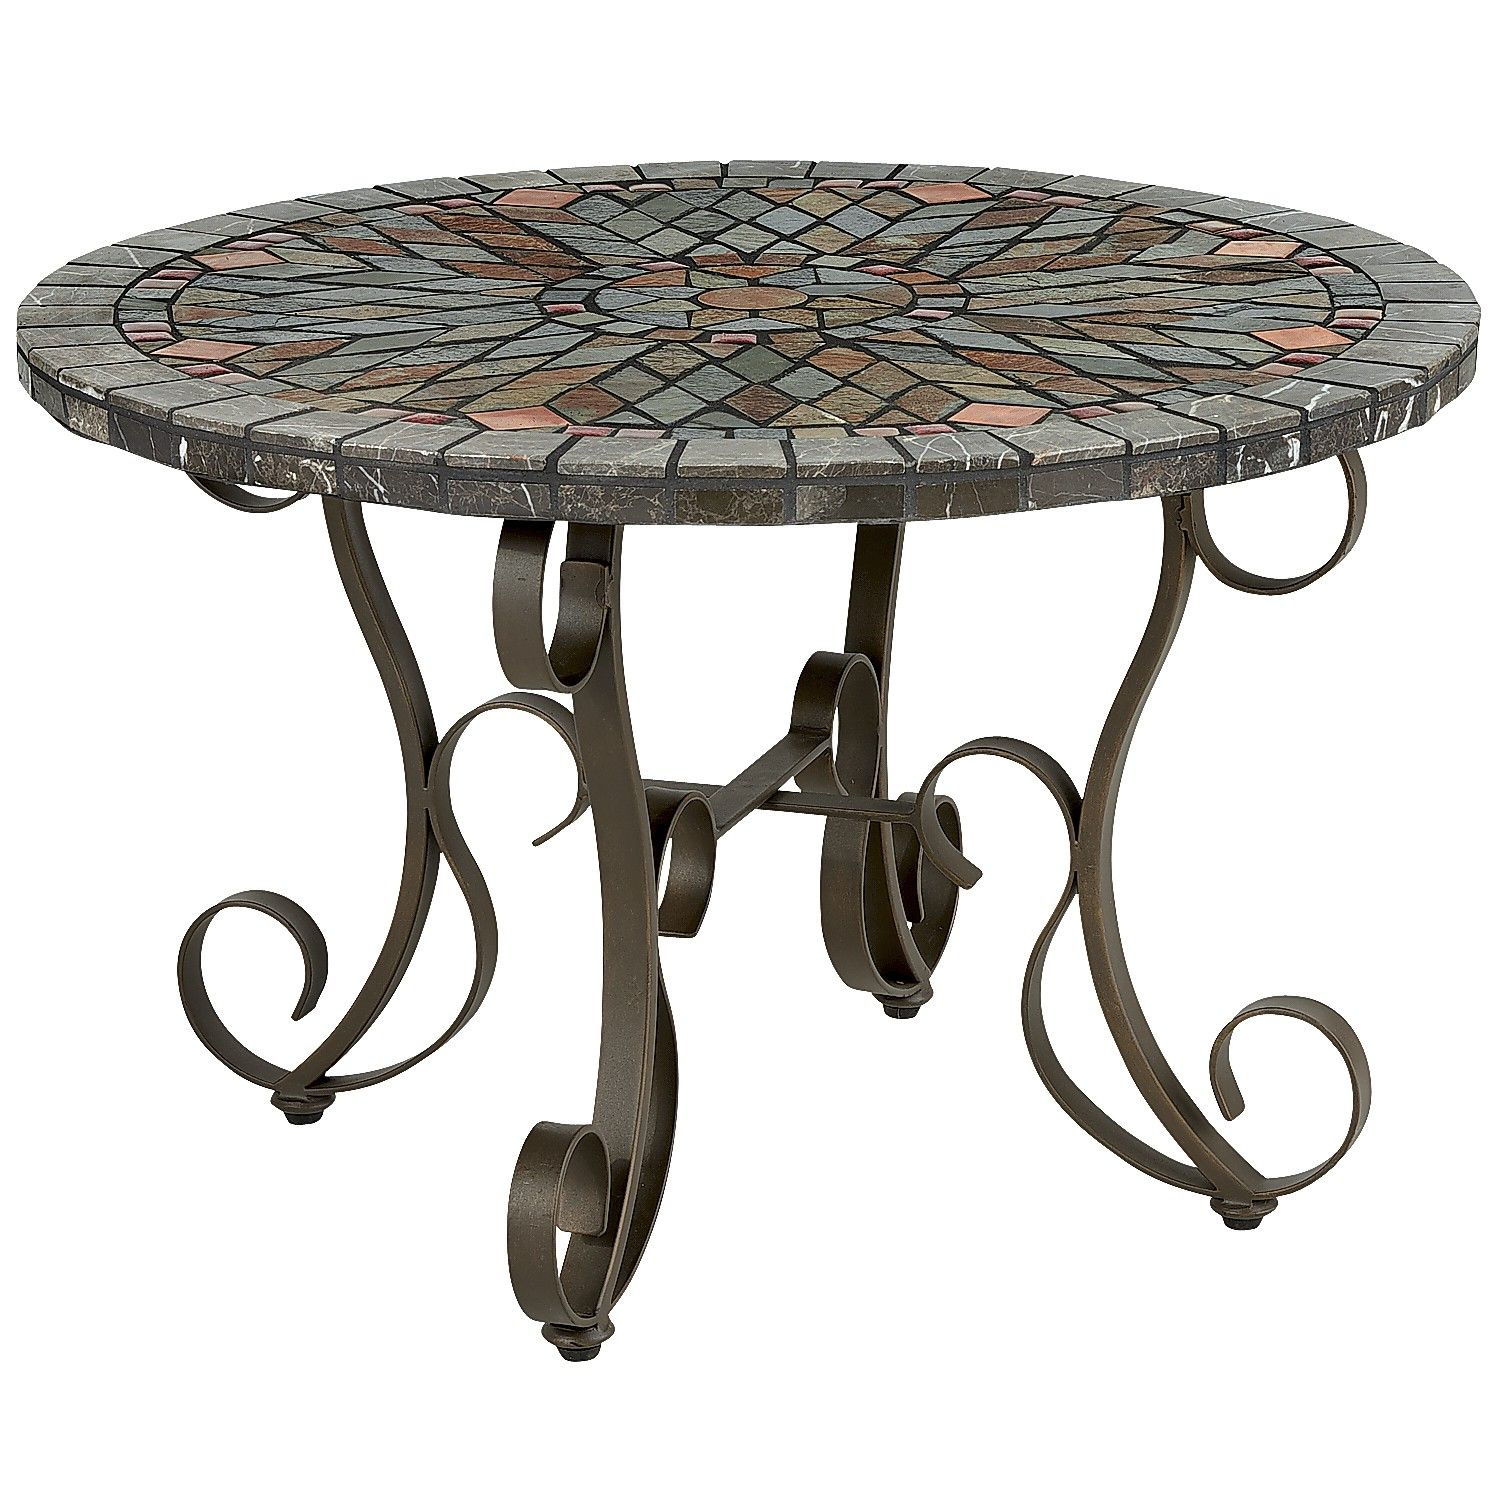 Multi Colored Verazze Mosaic Coffee Table Steel Outdoor in sizing 1500 X 1500